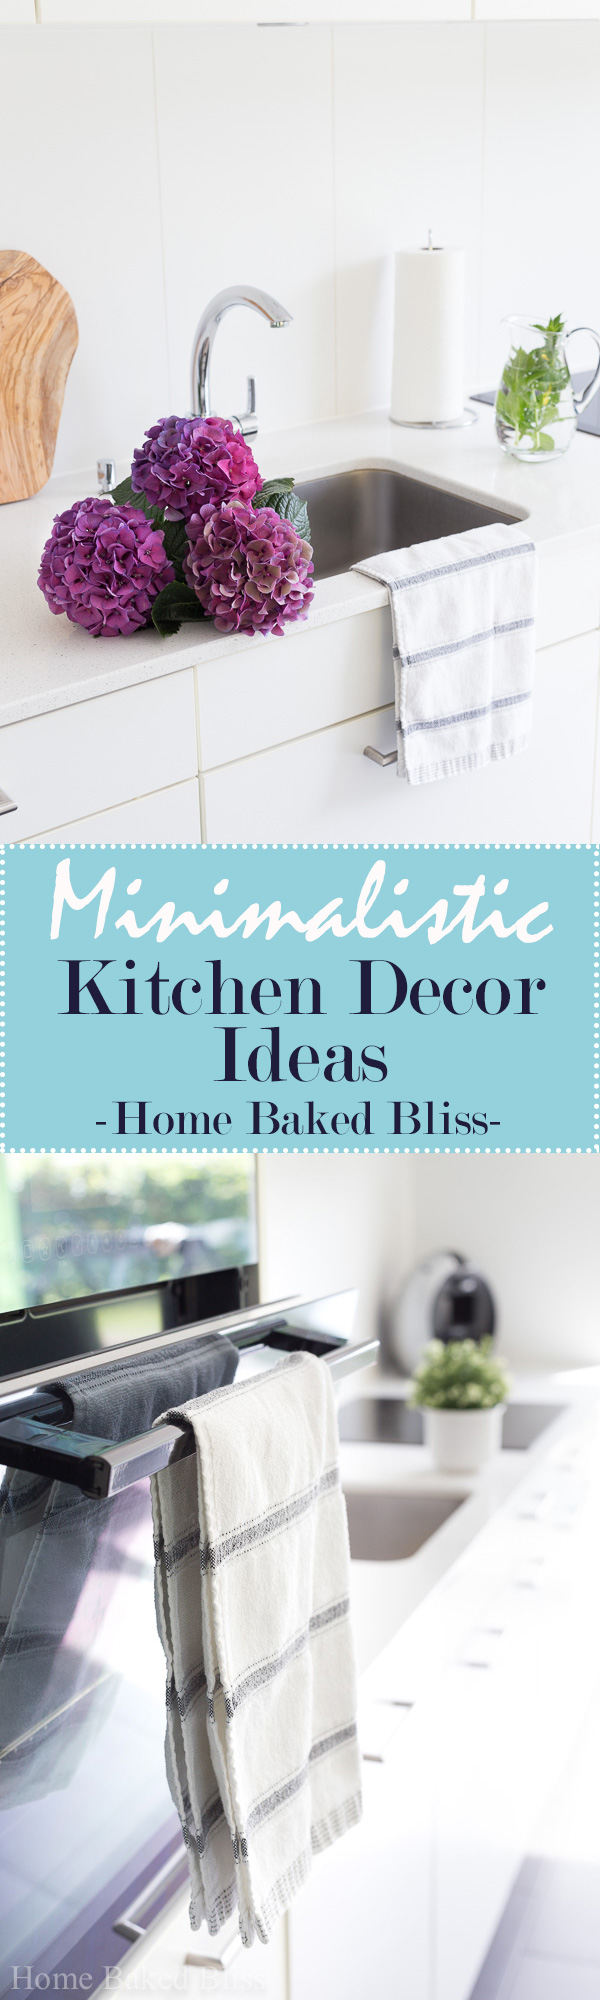 Get inspired with these minimalistic kitchen decor ideas!